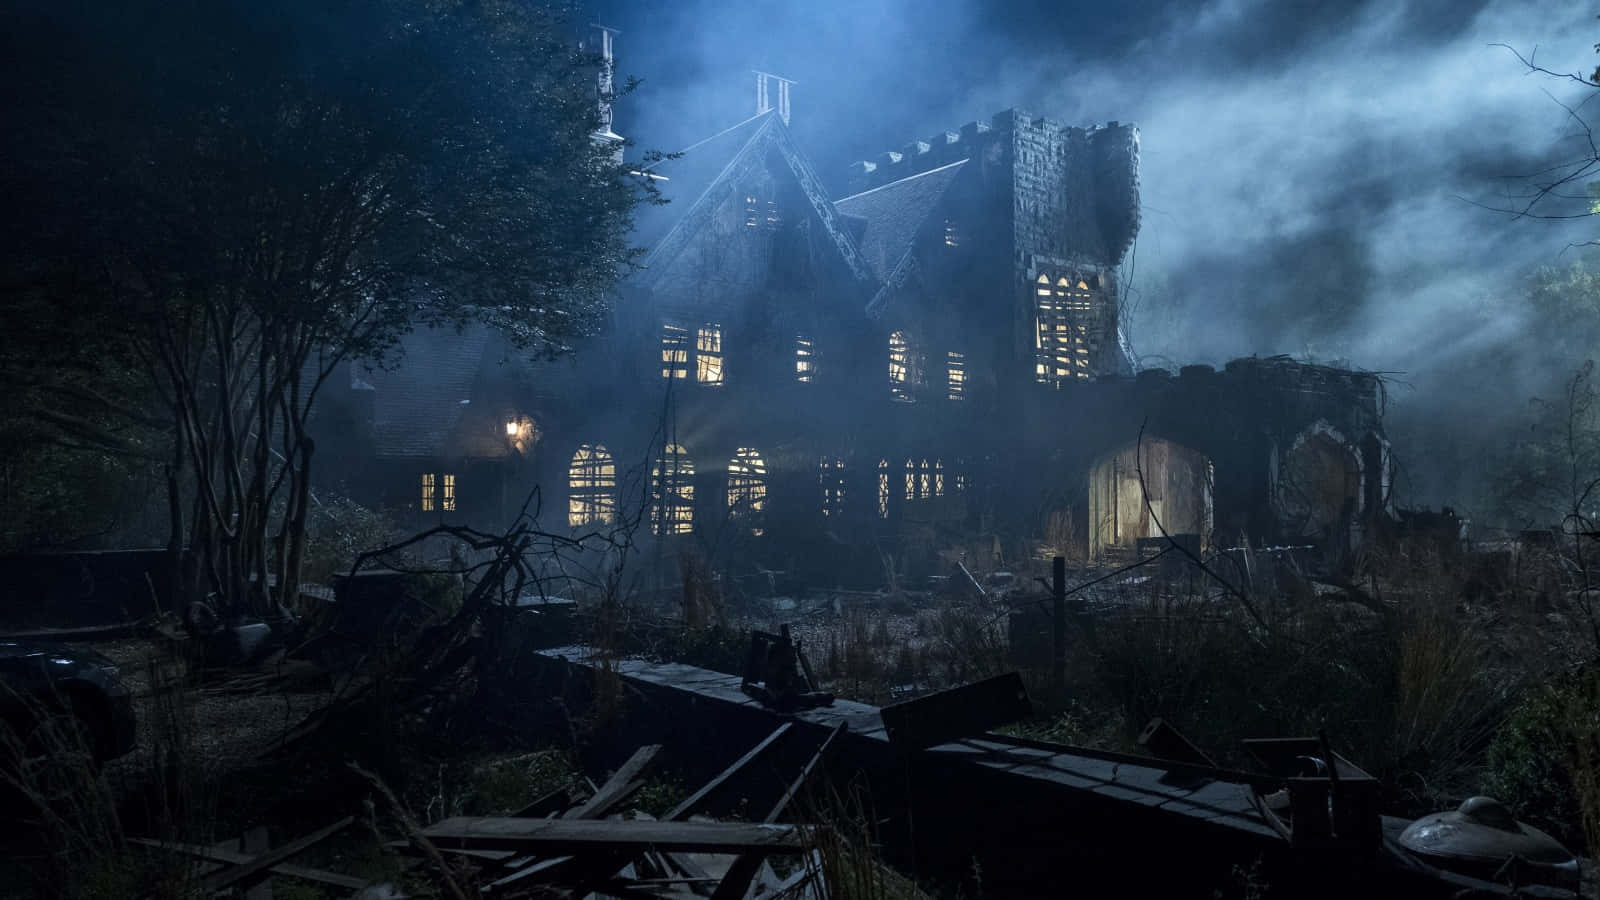 An Eerily Captivating Scene From Netflix's - The Haunting Of Bly Manor Wallpaper